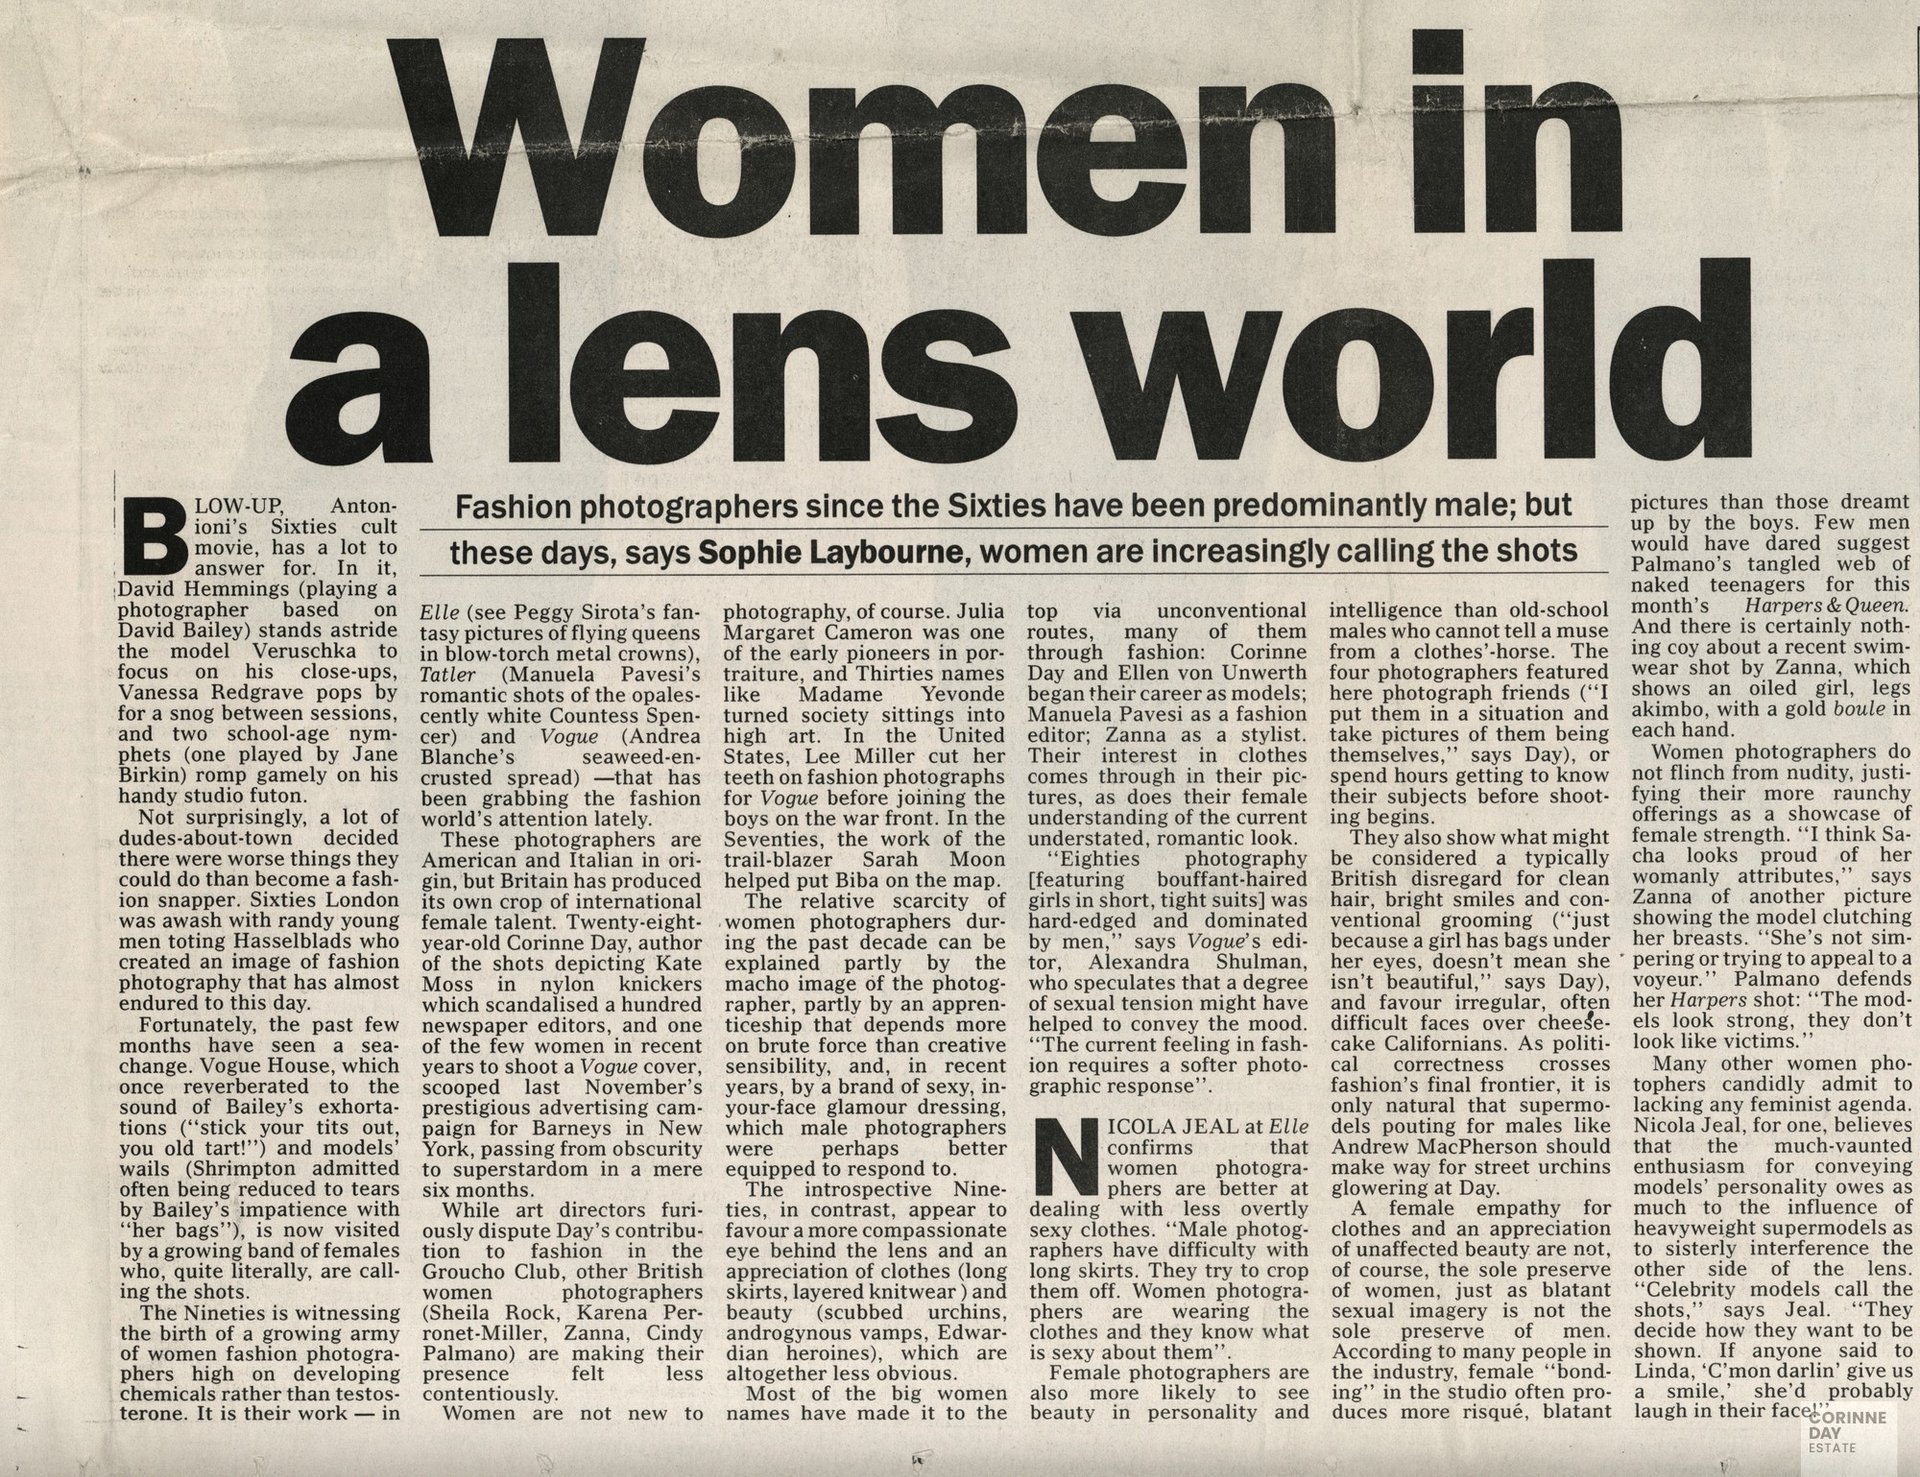 Women in a lens world, The Sunday Telegraph, 3 Oct 1993 — Image 1 of 2